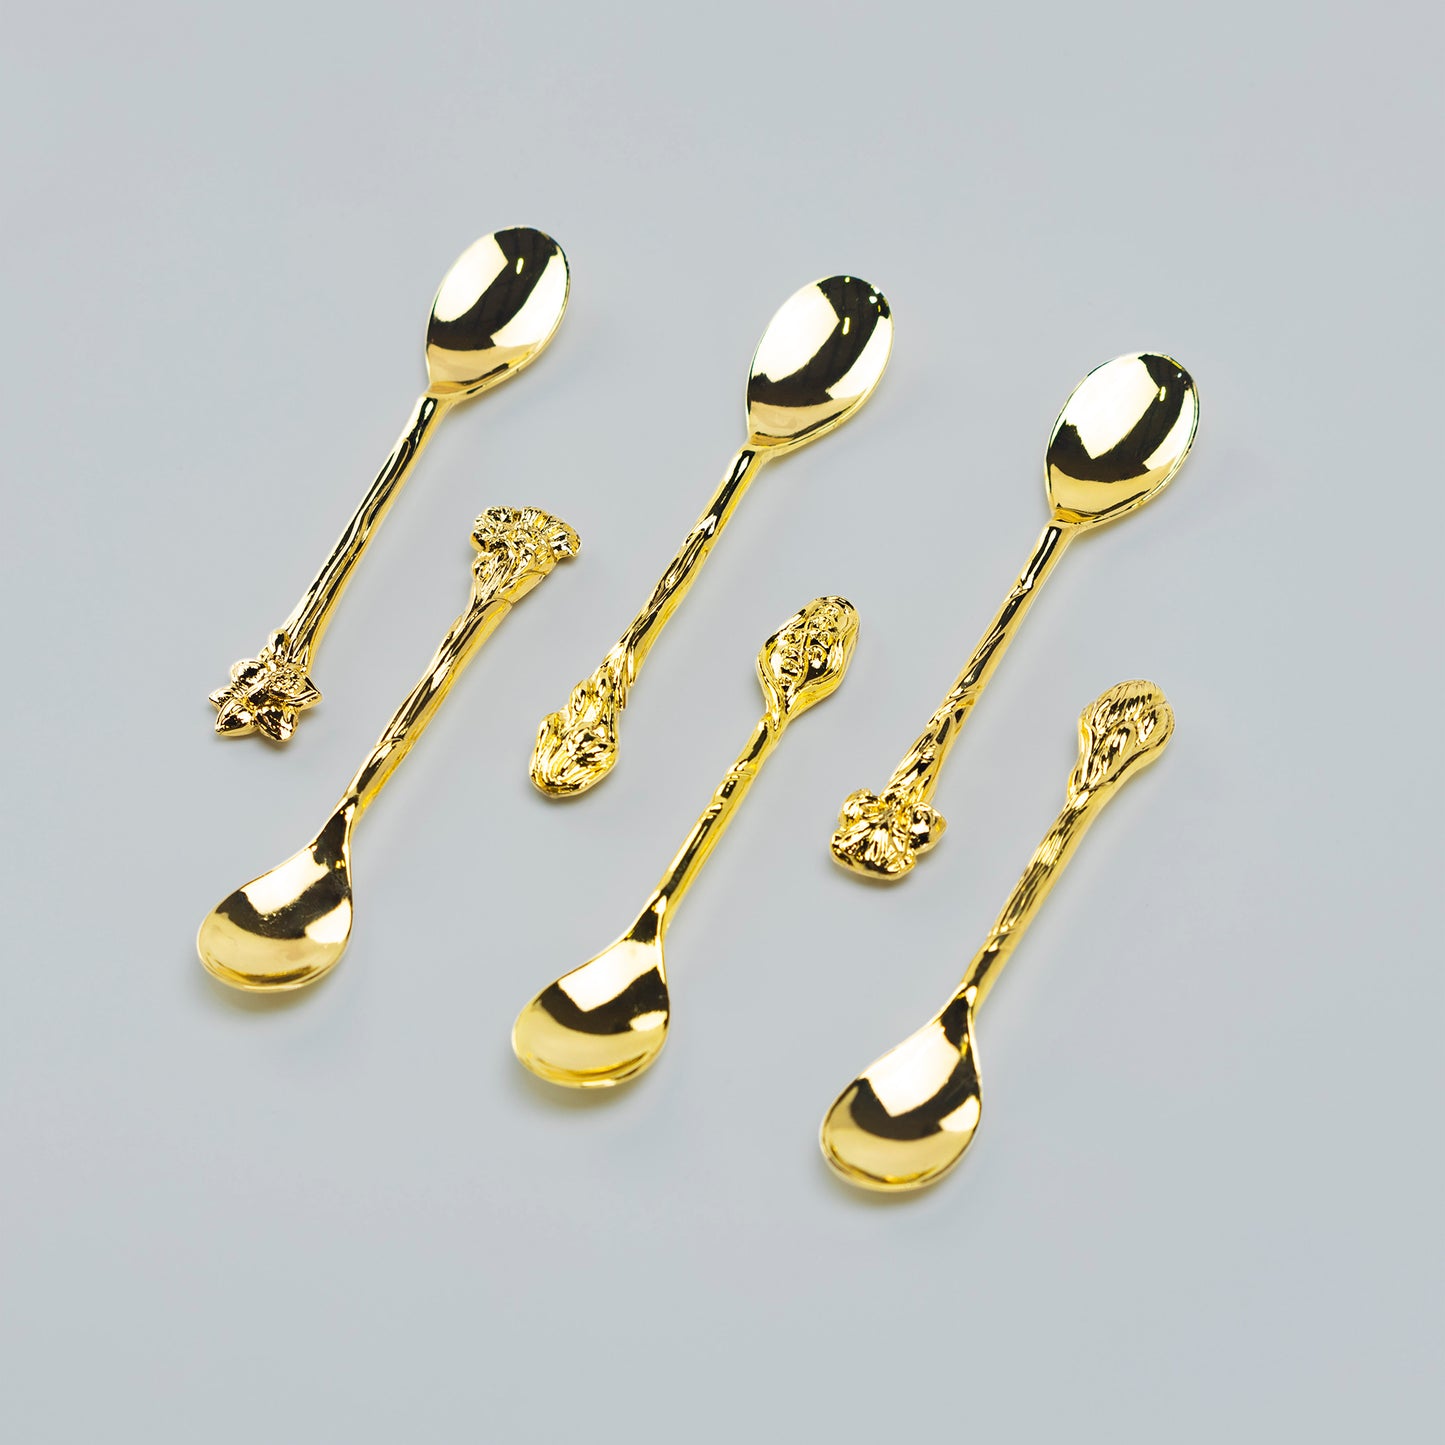 Gold Gilded Demi Spoon Set of 6 with Assorted Floral Handle Design